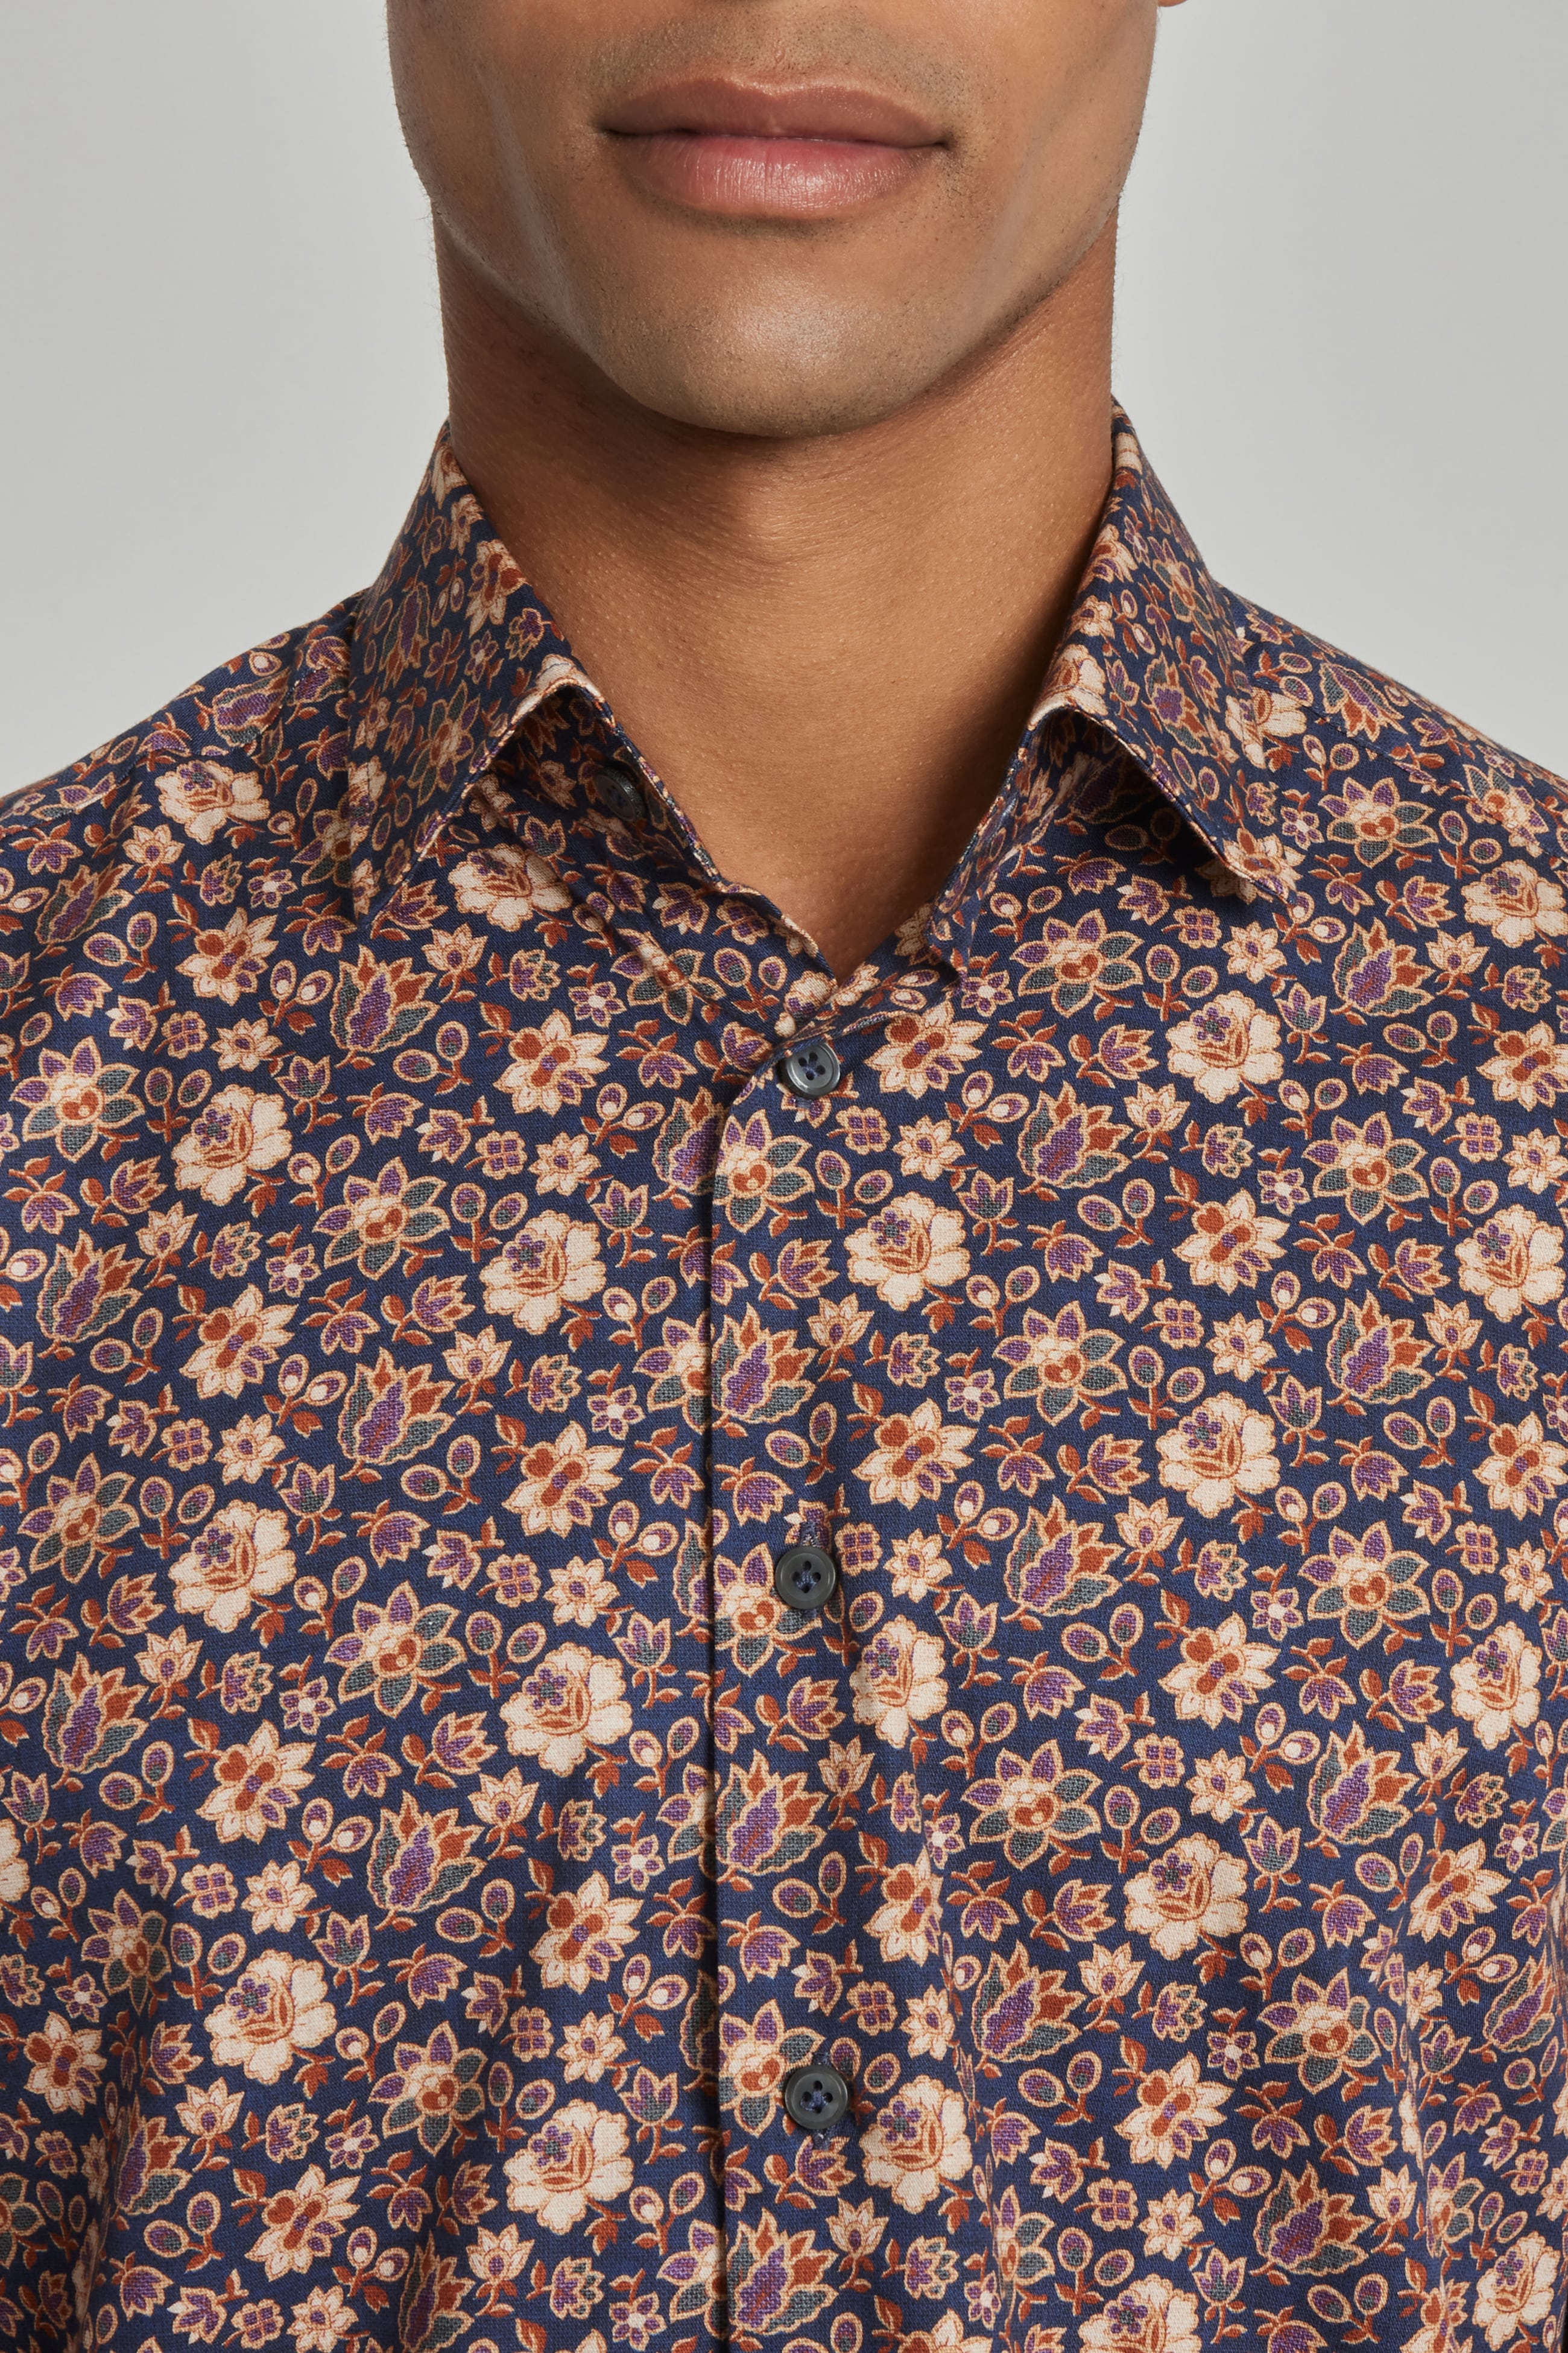 Alt view 1 Floral Print Cotton Shirt in Navy and Burgundy